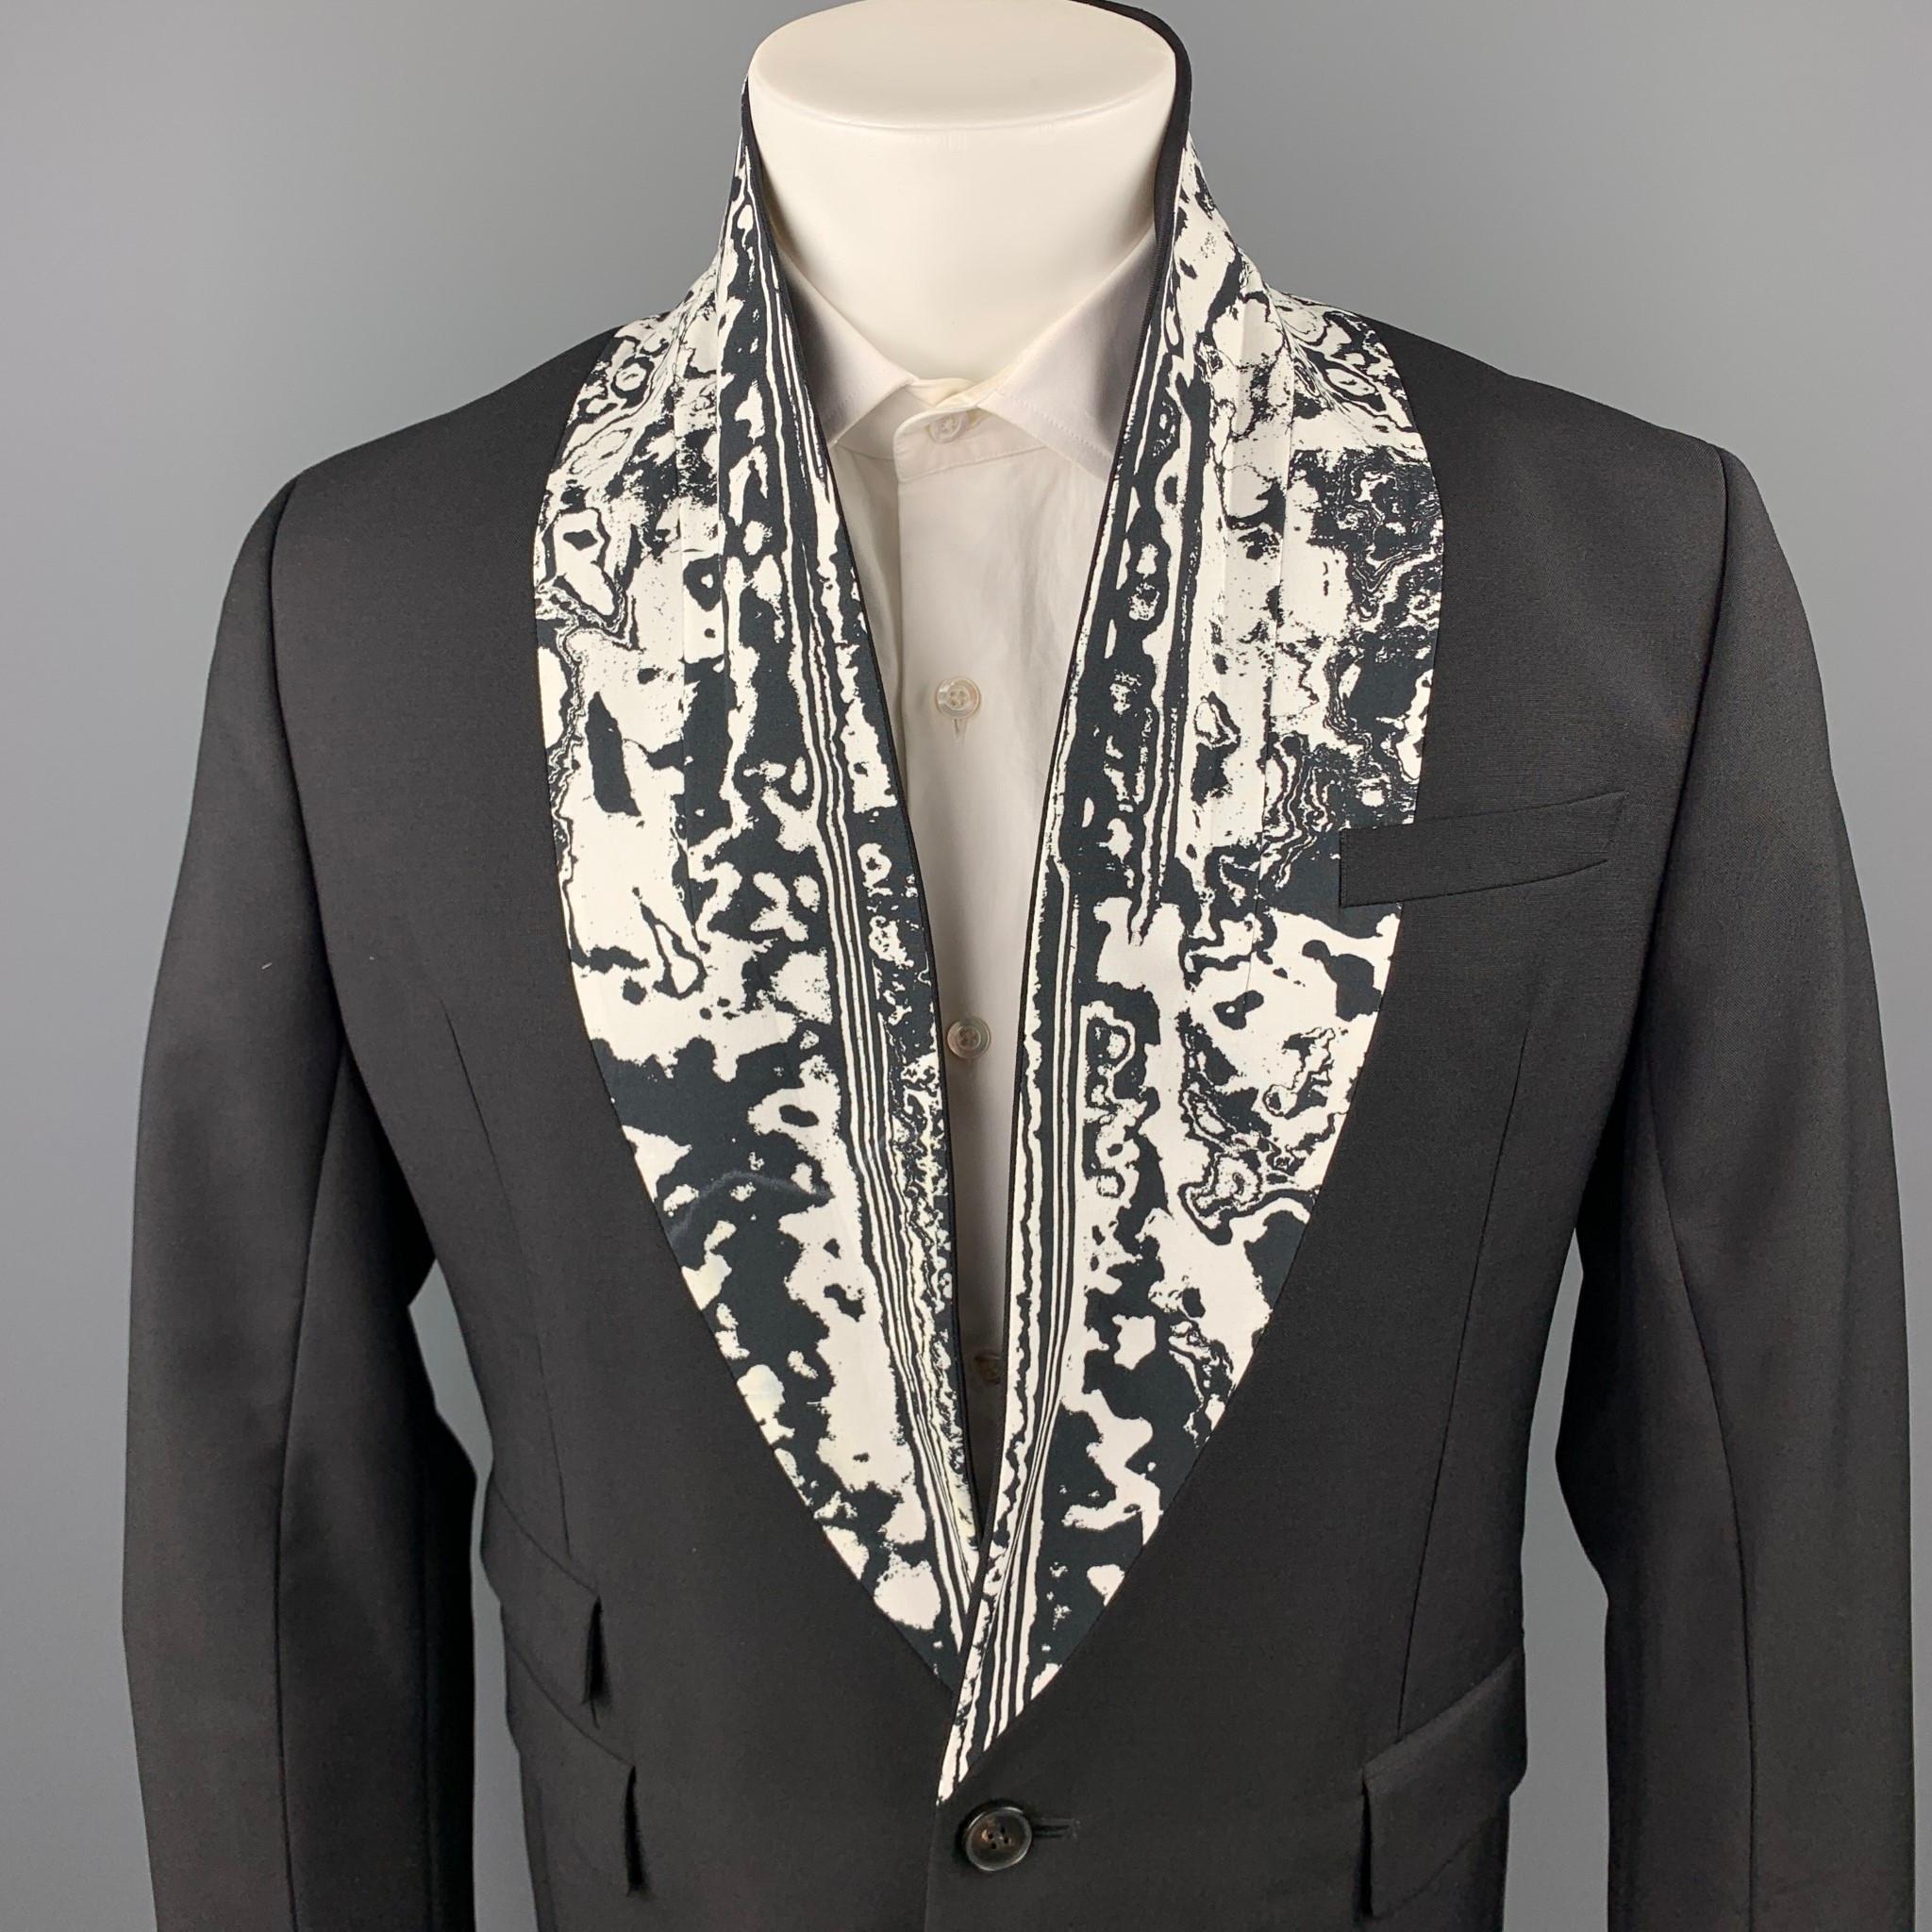 MCQ by ALEXANDER McQUEEN sport coat comes in a black wool / mohair with a full monogram print featuring a printed shawl collar, flap pockets, and a single button closure. Made in Portugal.

Excellent Pre-Owned Condition.
Marked: IT